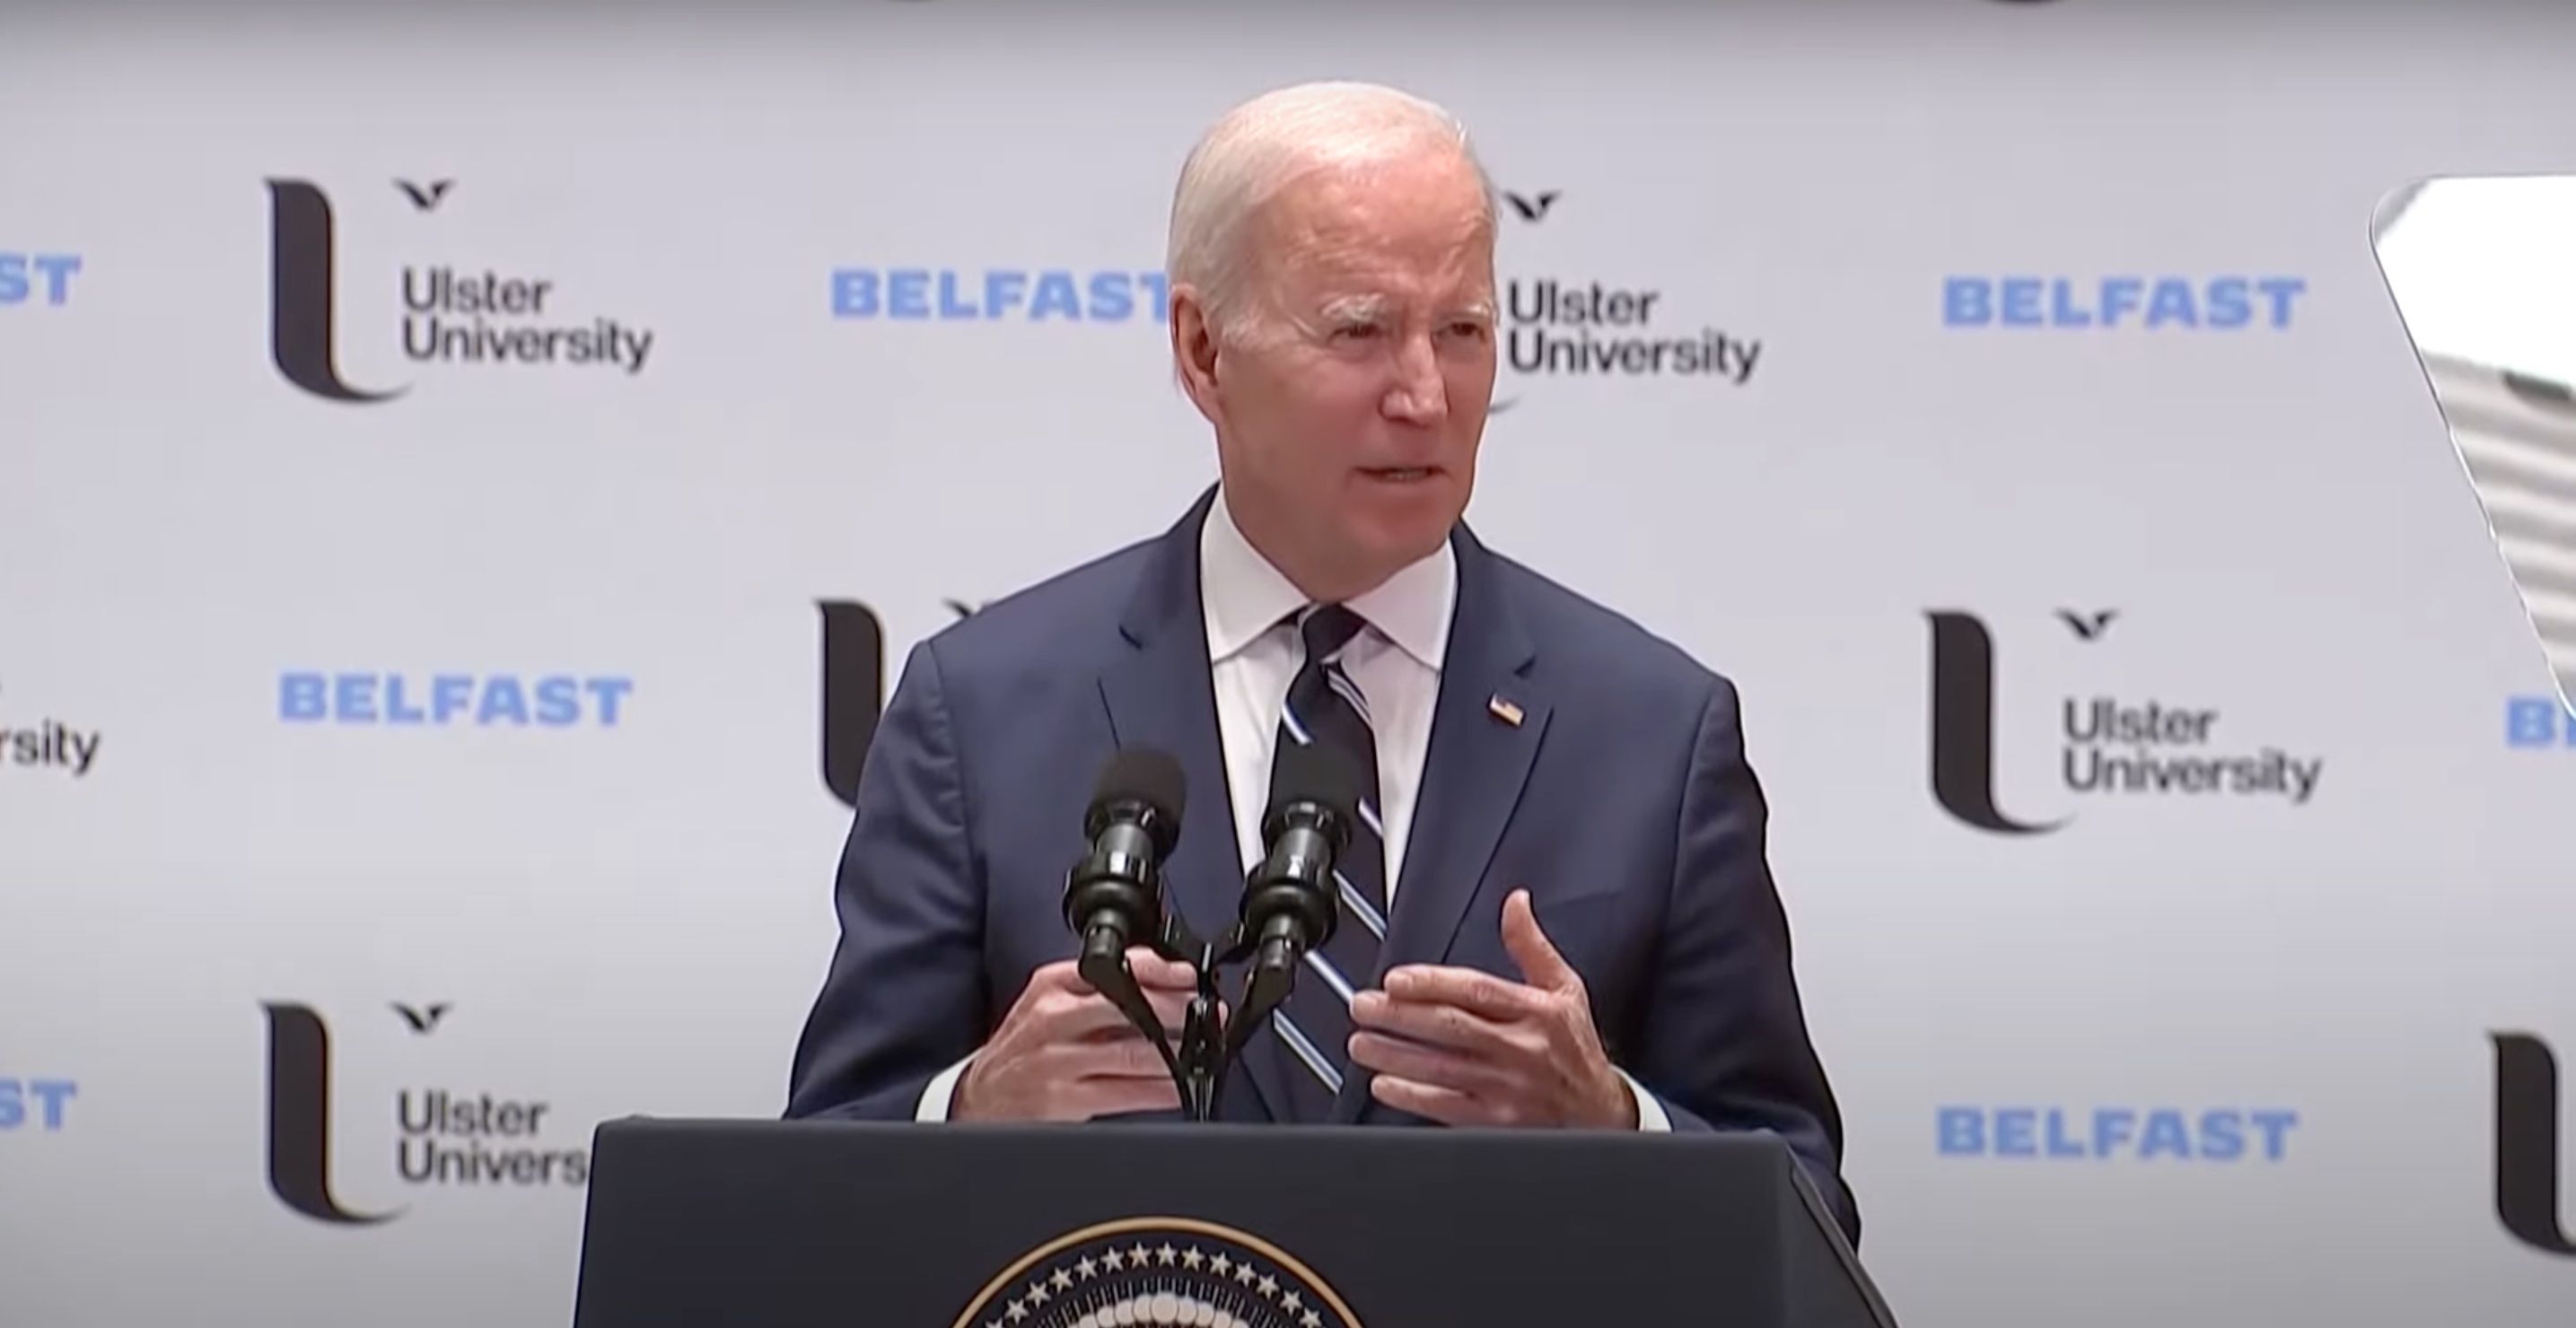 ON TARGET: President Biden\'s speech in Belfast resonated North and South